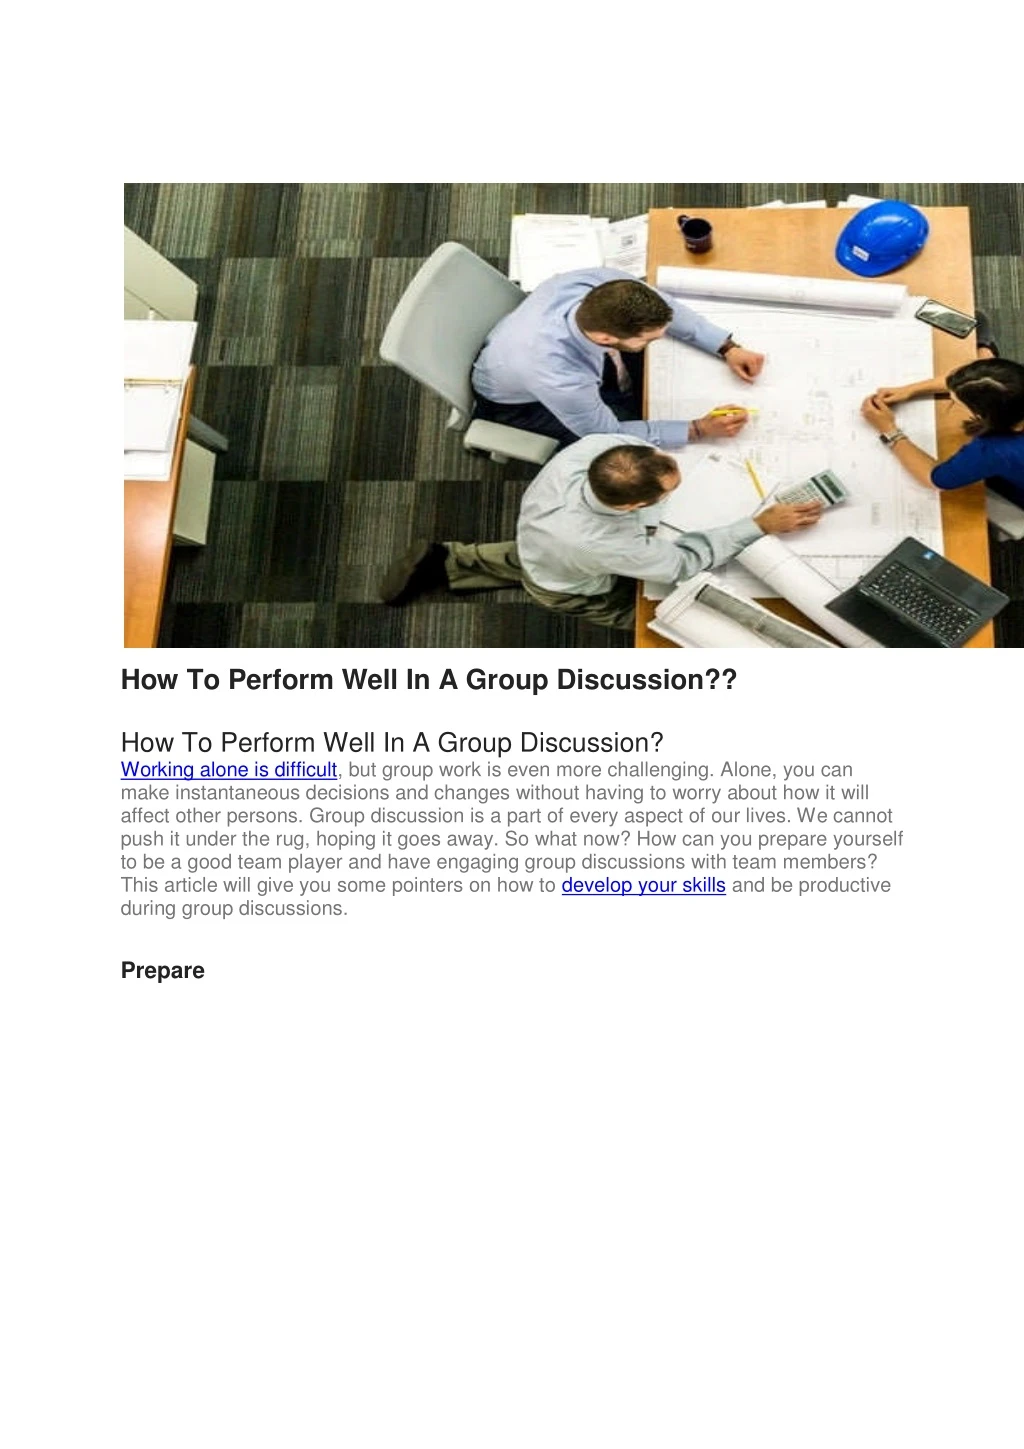 how to perform well in a group discussion